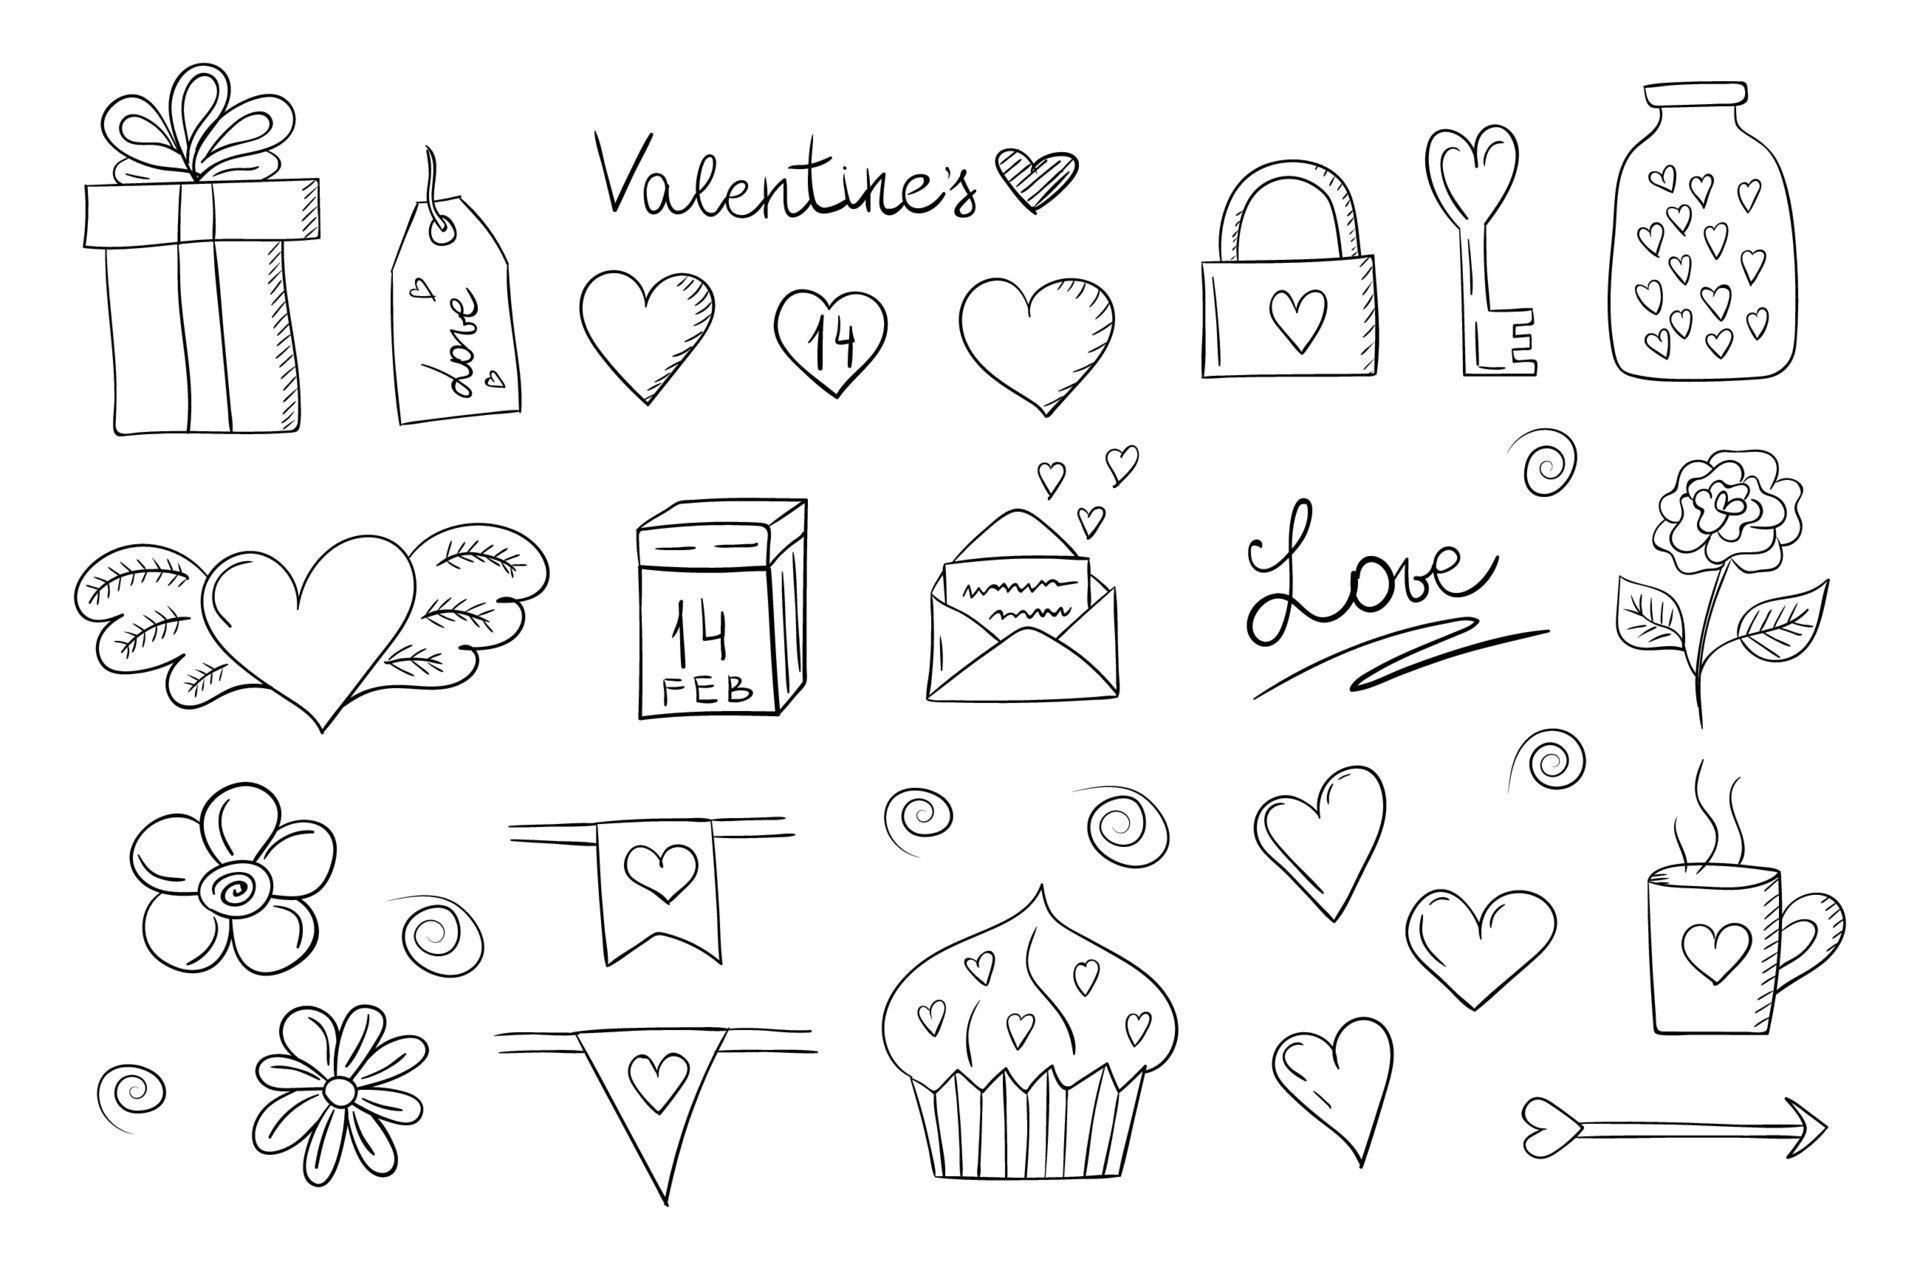 Valentines day vector doodle set. Black and white hand drawn elements ...